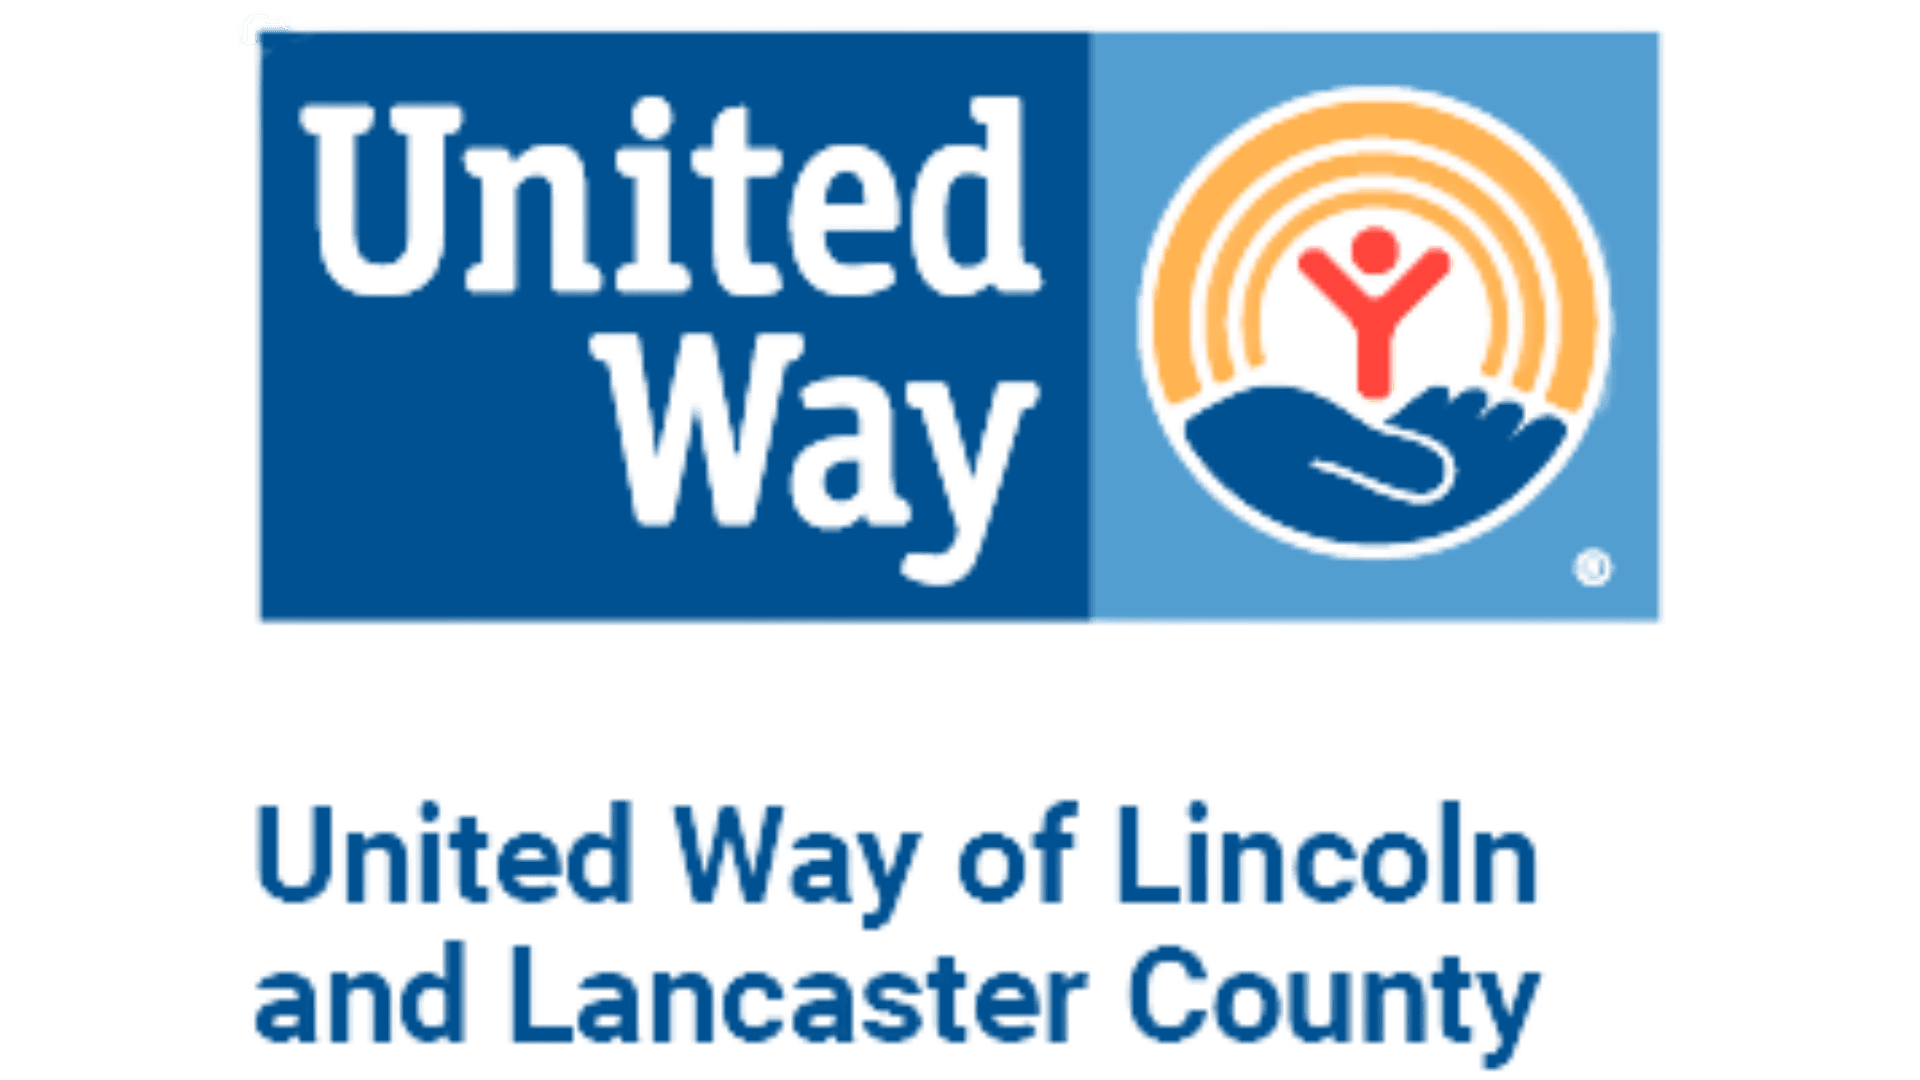 United Way of Lincoln & Lancaster County